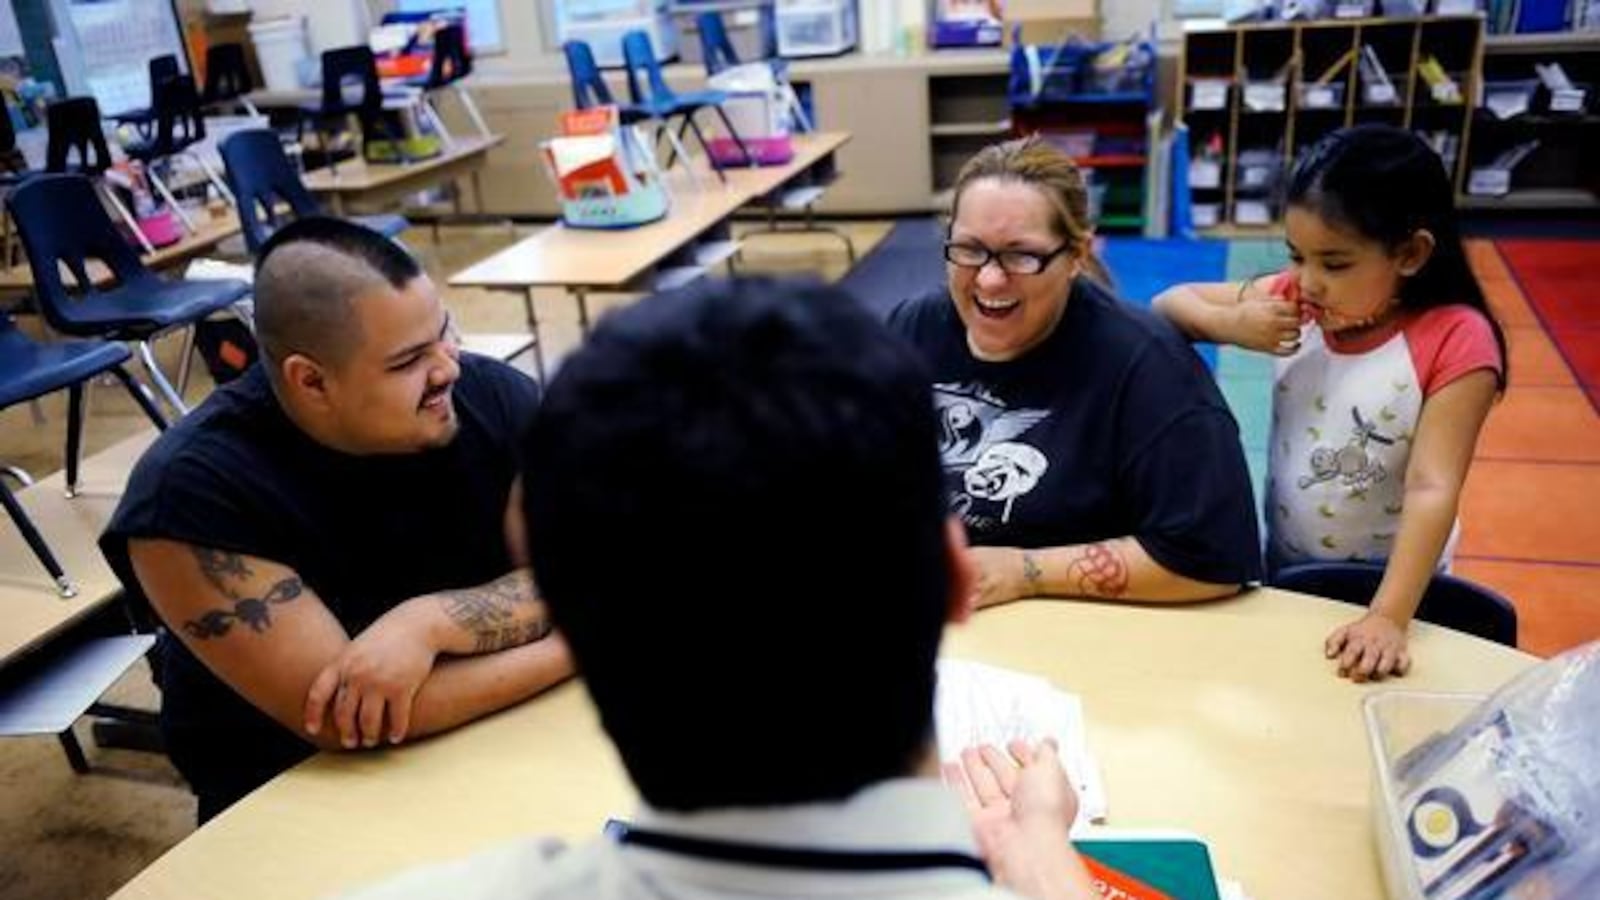 Joshua Montoya and Tina Chavez attend a parent-teacher conference for her daughter, Sofia, at Fairview Elementary in 2010.